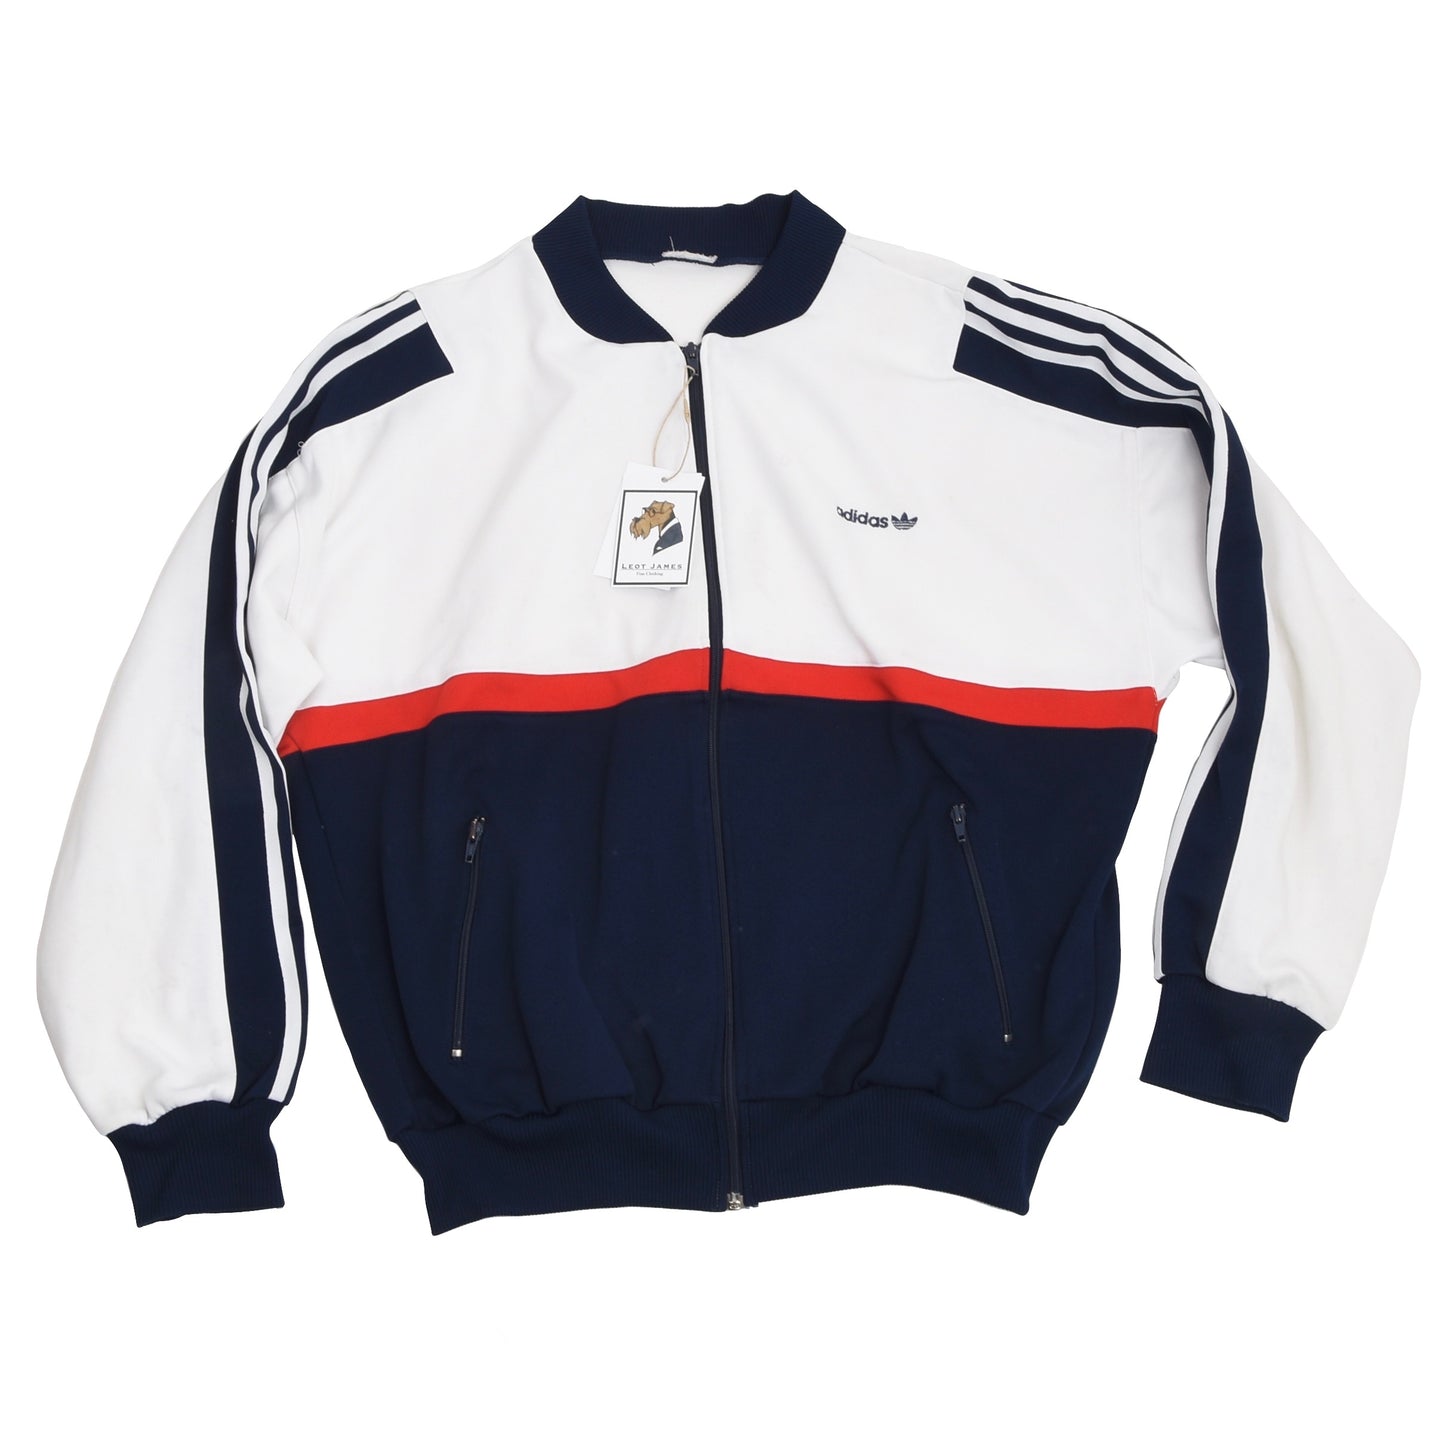 Vintage '80s Adidas Track Suit Size D8 - Red, White, Navy